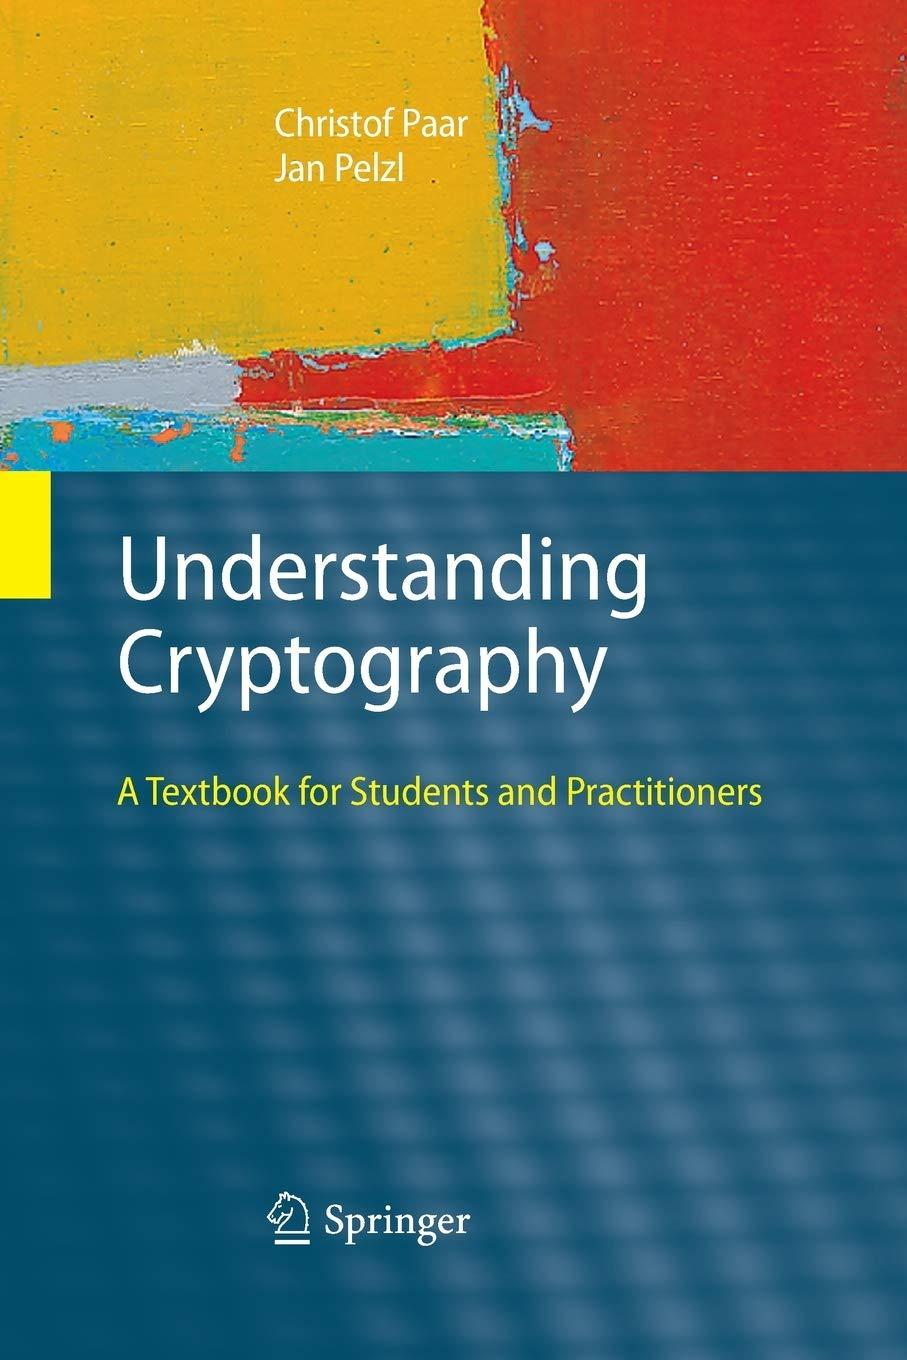 understanding cryptography a textbook for students and practitioners 2010th edition christof paar, jan pelzl